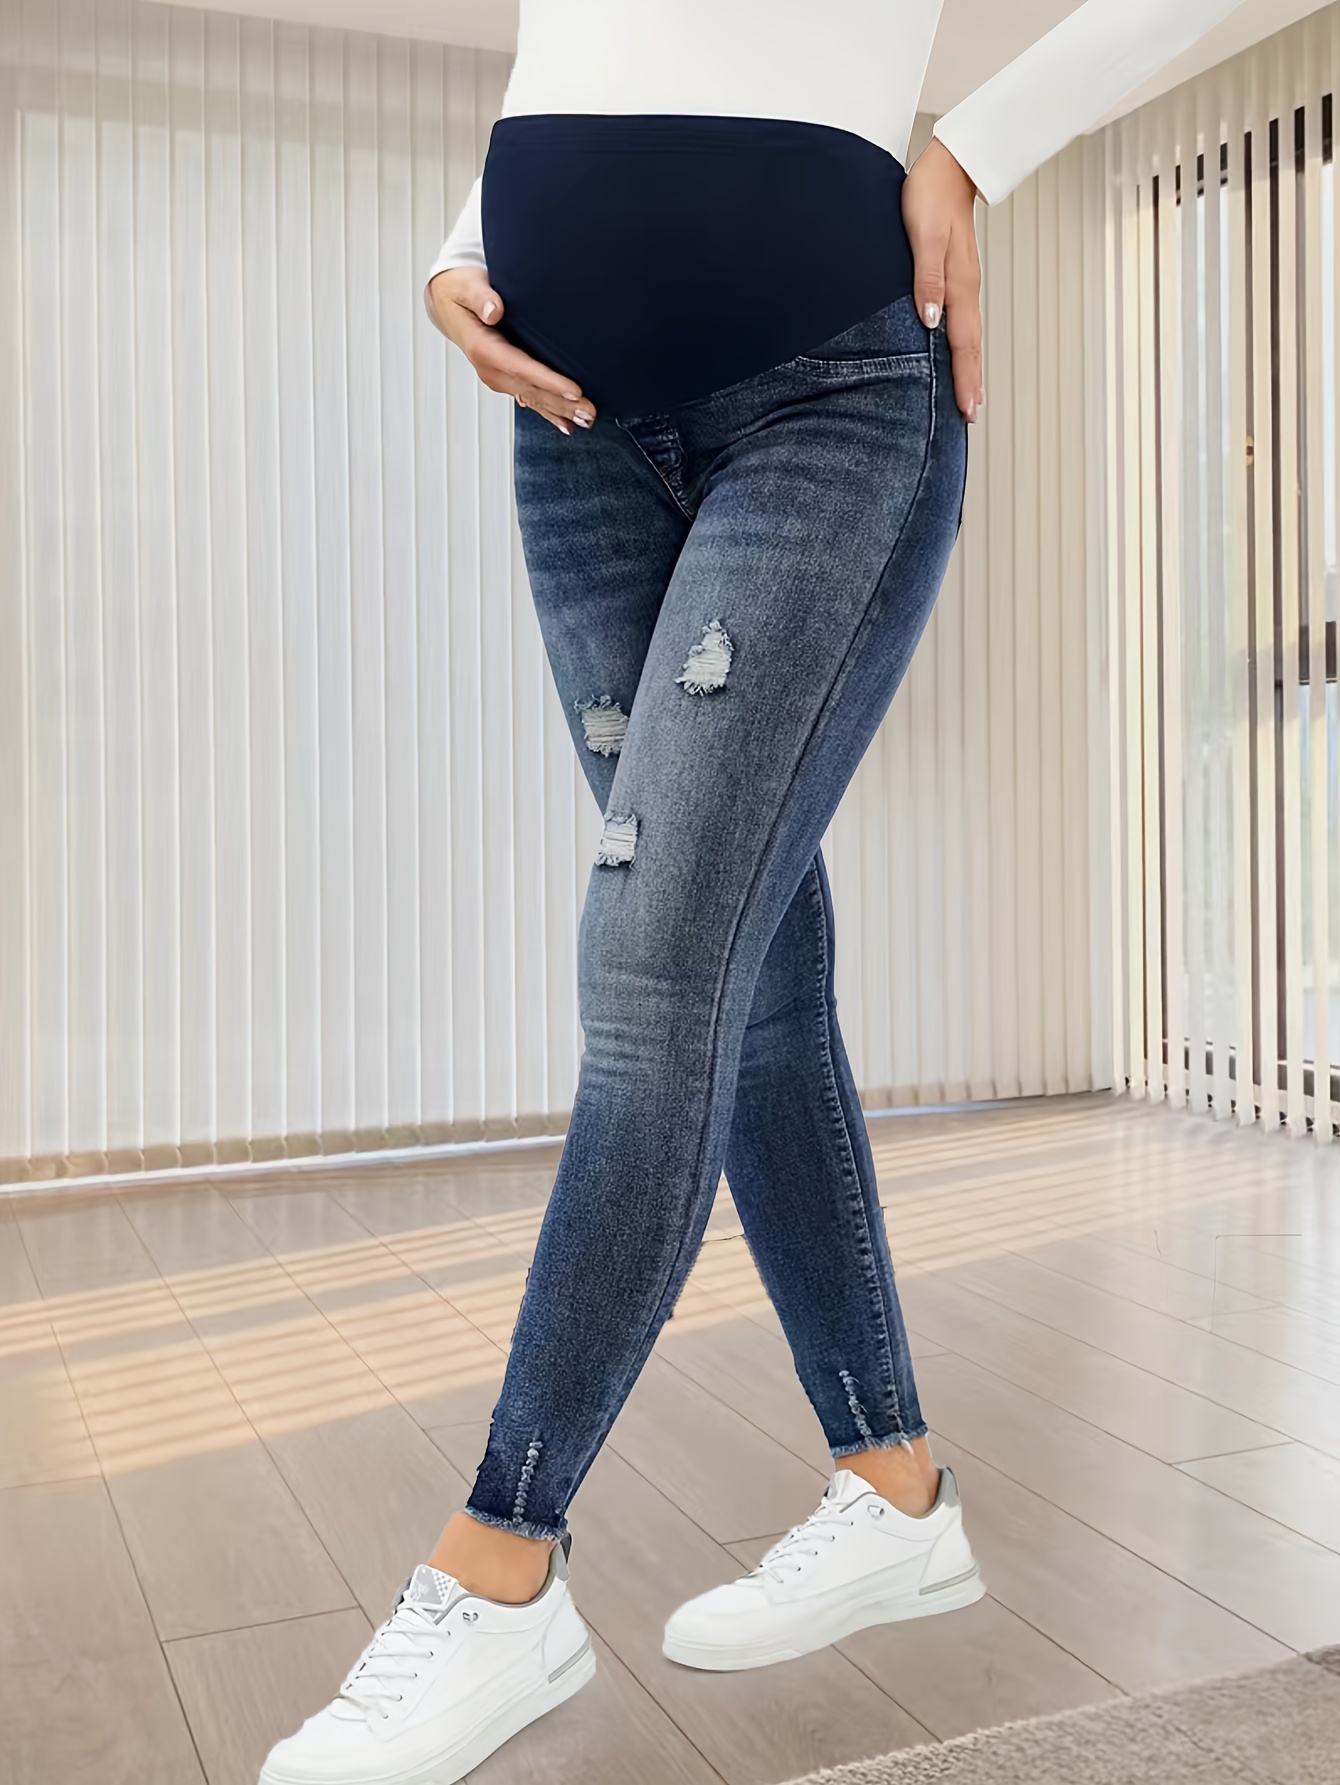 Skinny maternity jeans - Maternity - CLOTHING - Woman 